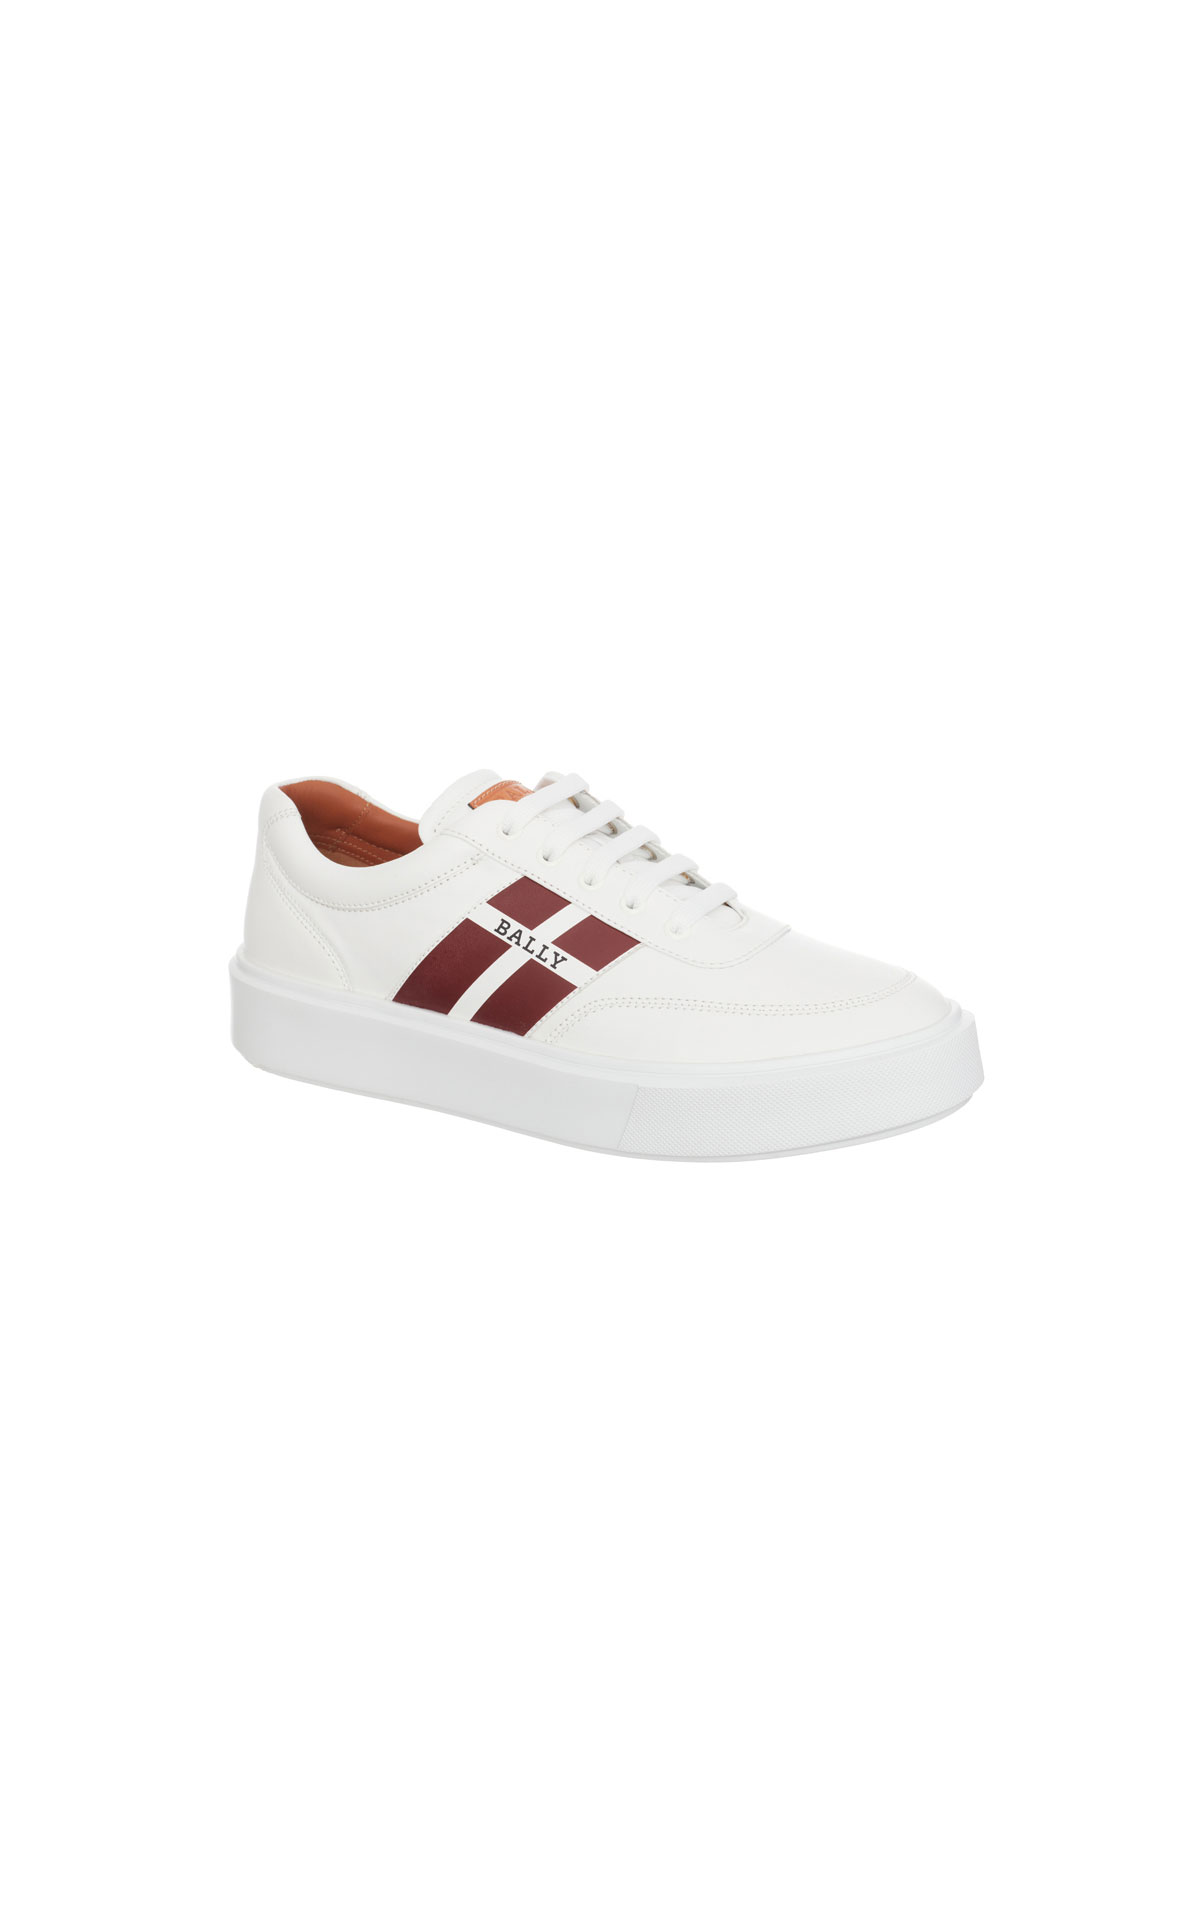 Bally Coby sneakers from Bicester Village